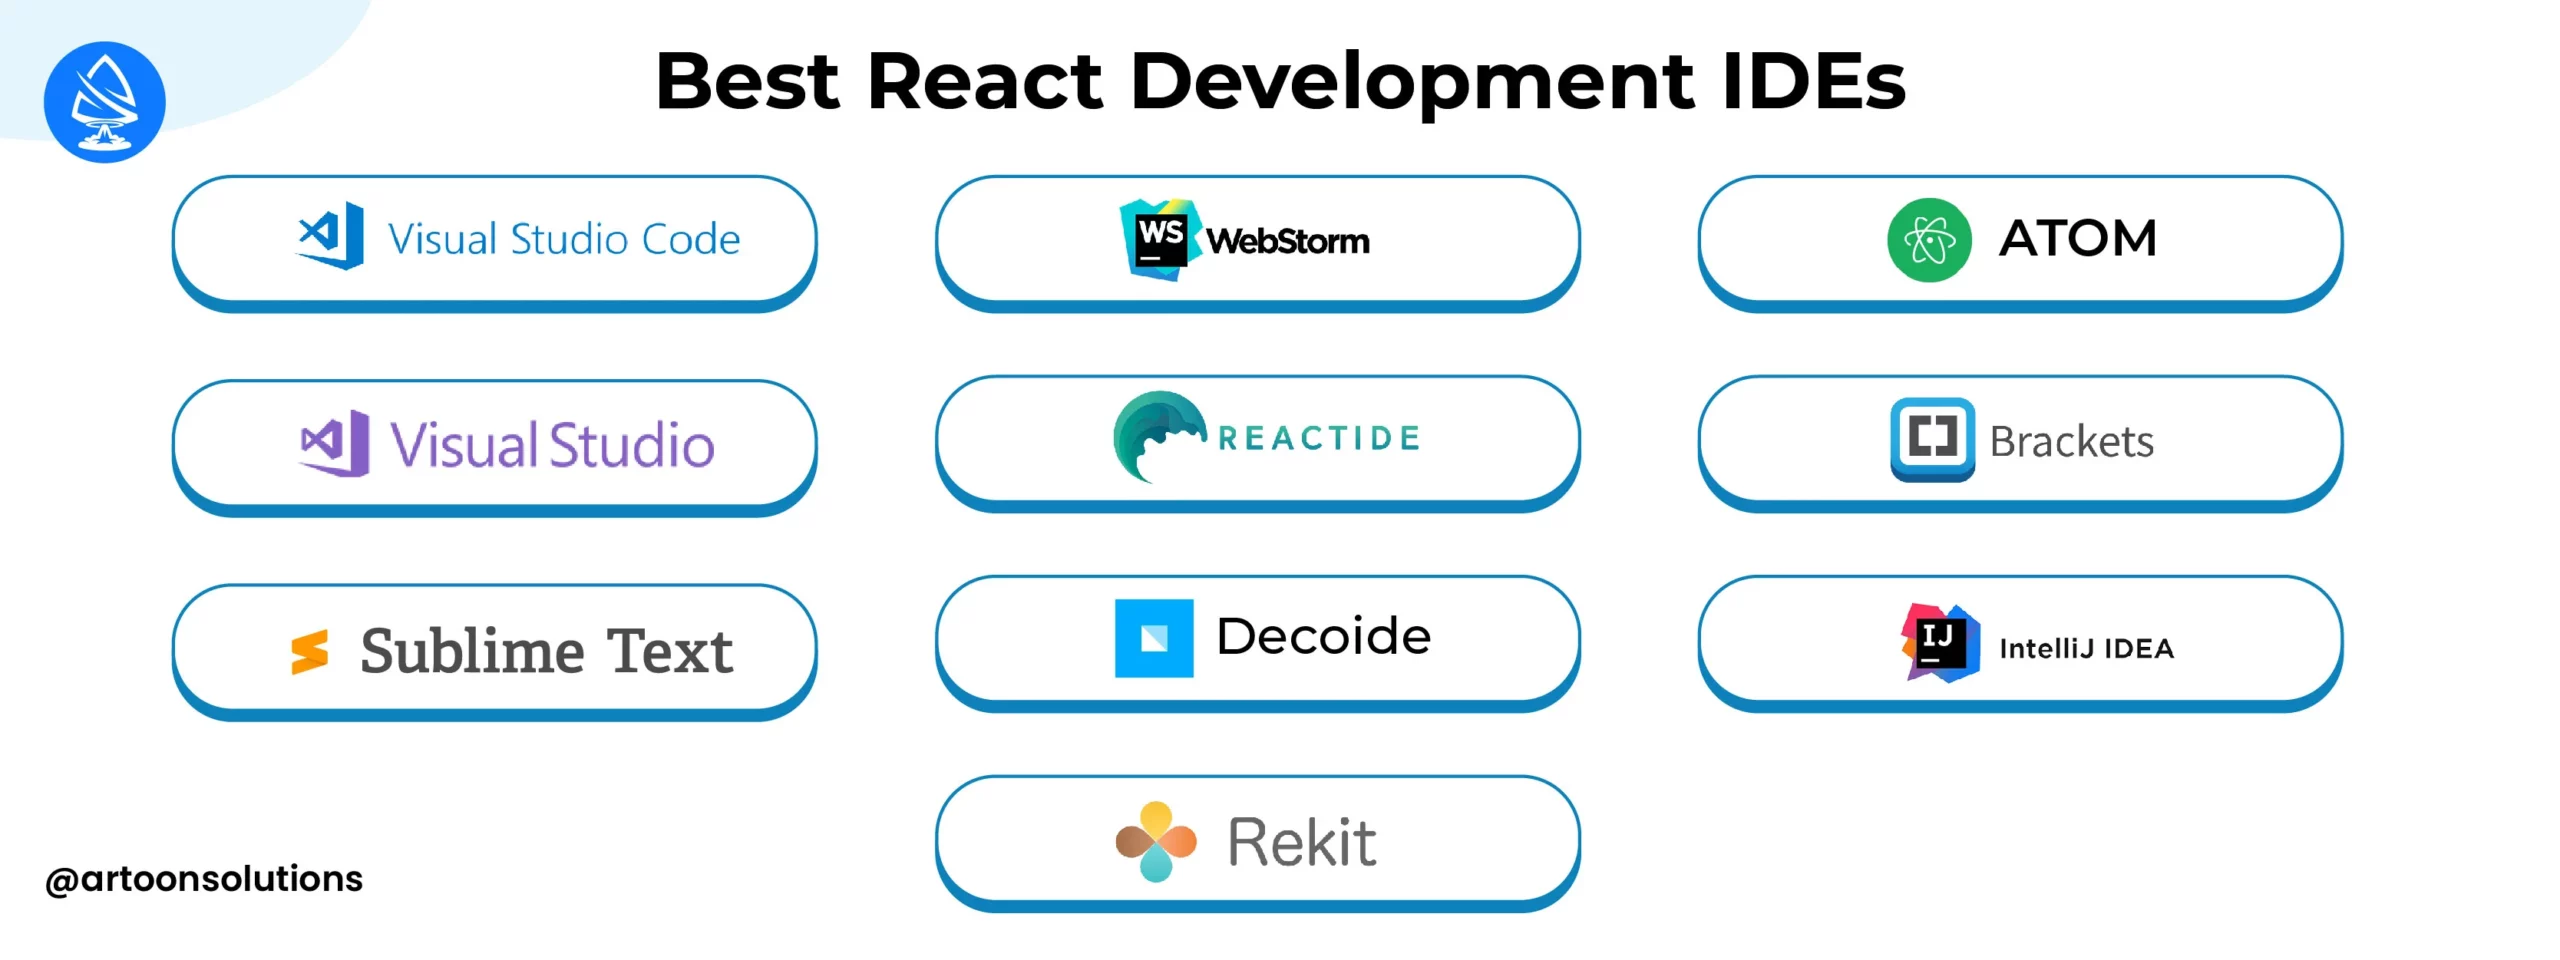 Best React Development IDEs for Collaborative Projects